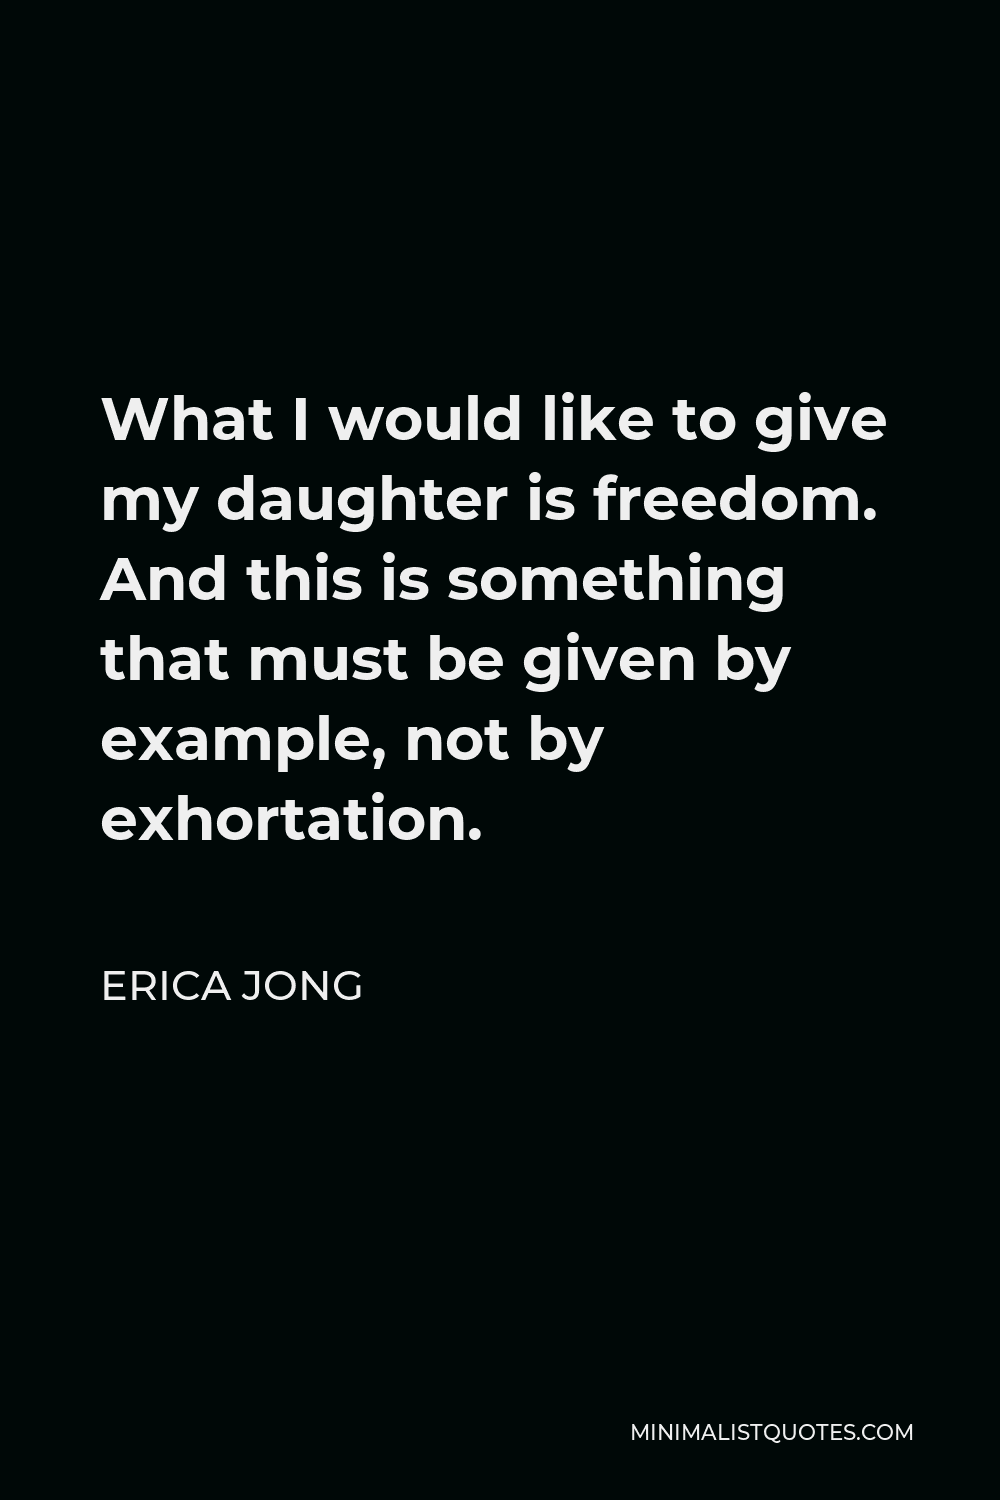 Erica Jong Quote - What I would like to give my daughter is freedom. And this is something that must be given by example, not exhortation.